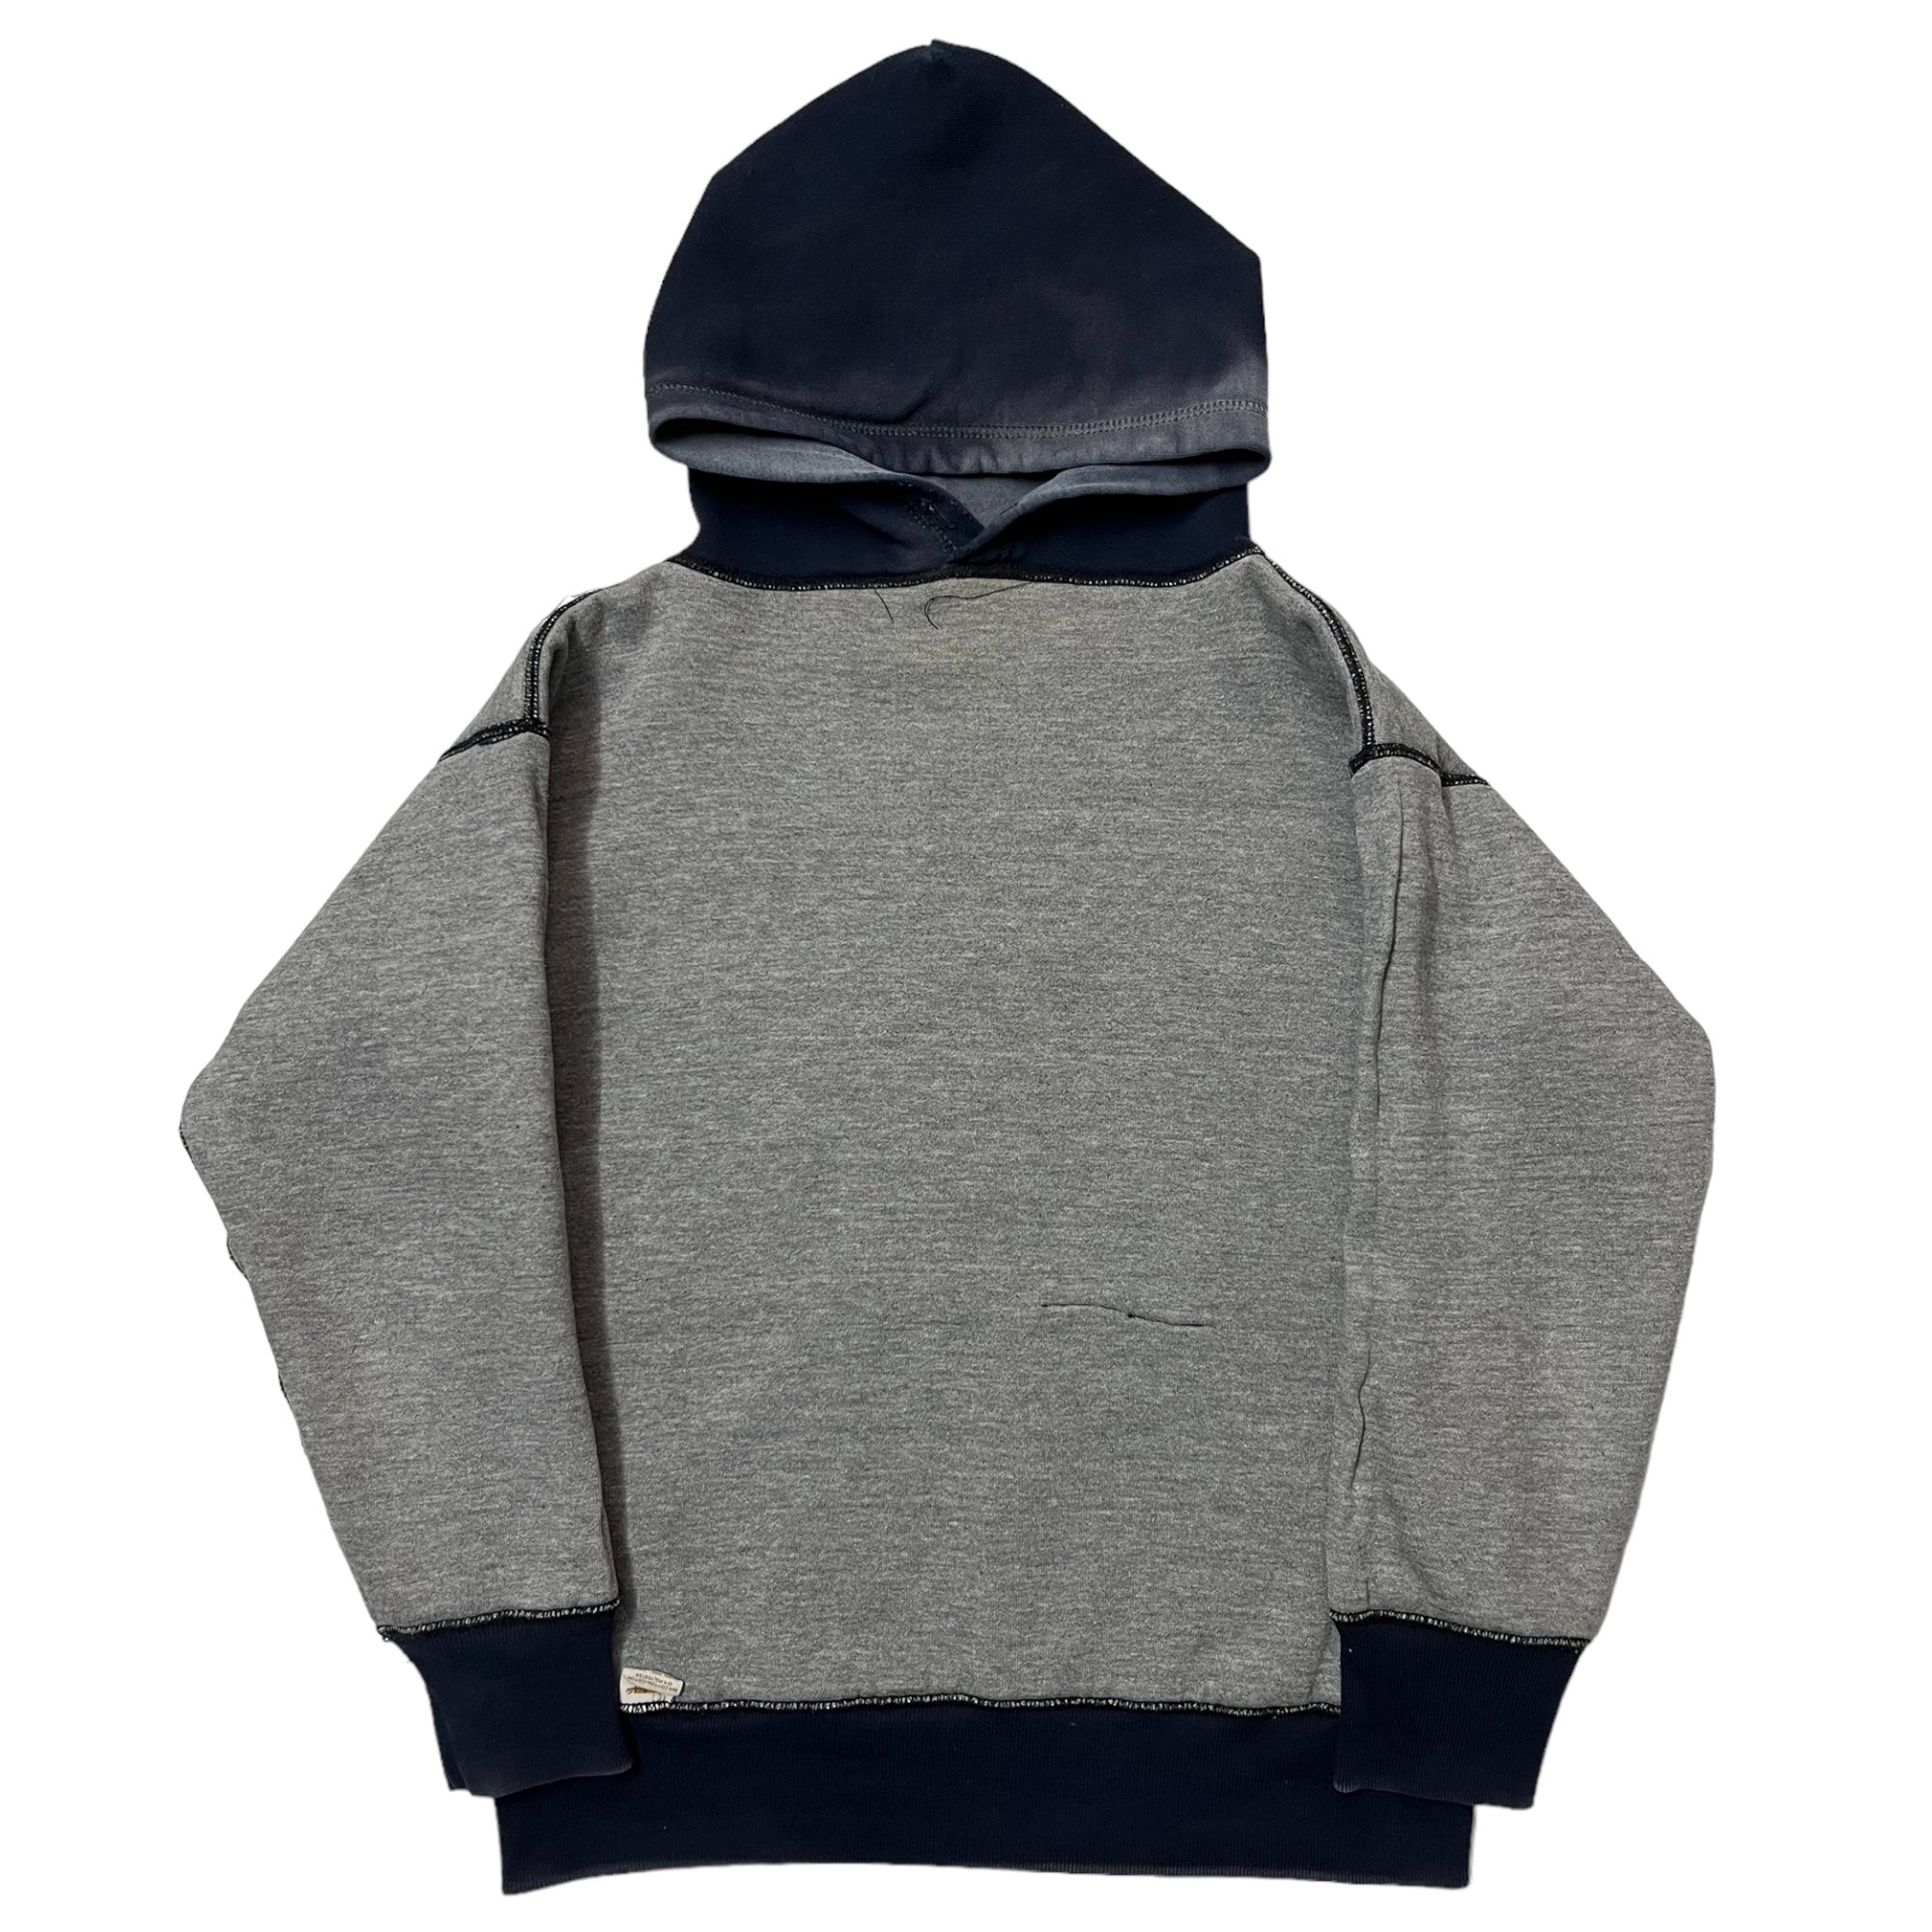 ‘70s Russell Sun Faded Double-Face Hooded Sweatshirt - Ghost Gray/Faded Navy - S